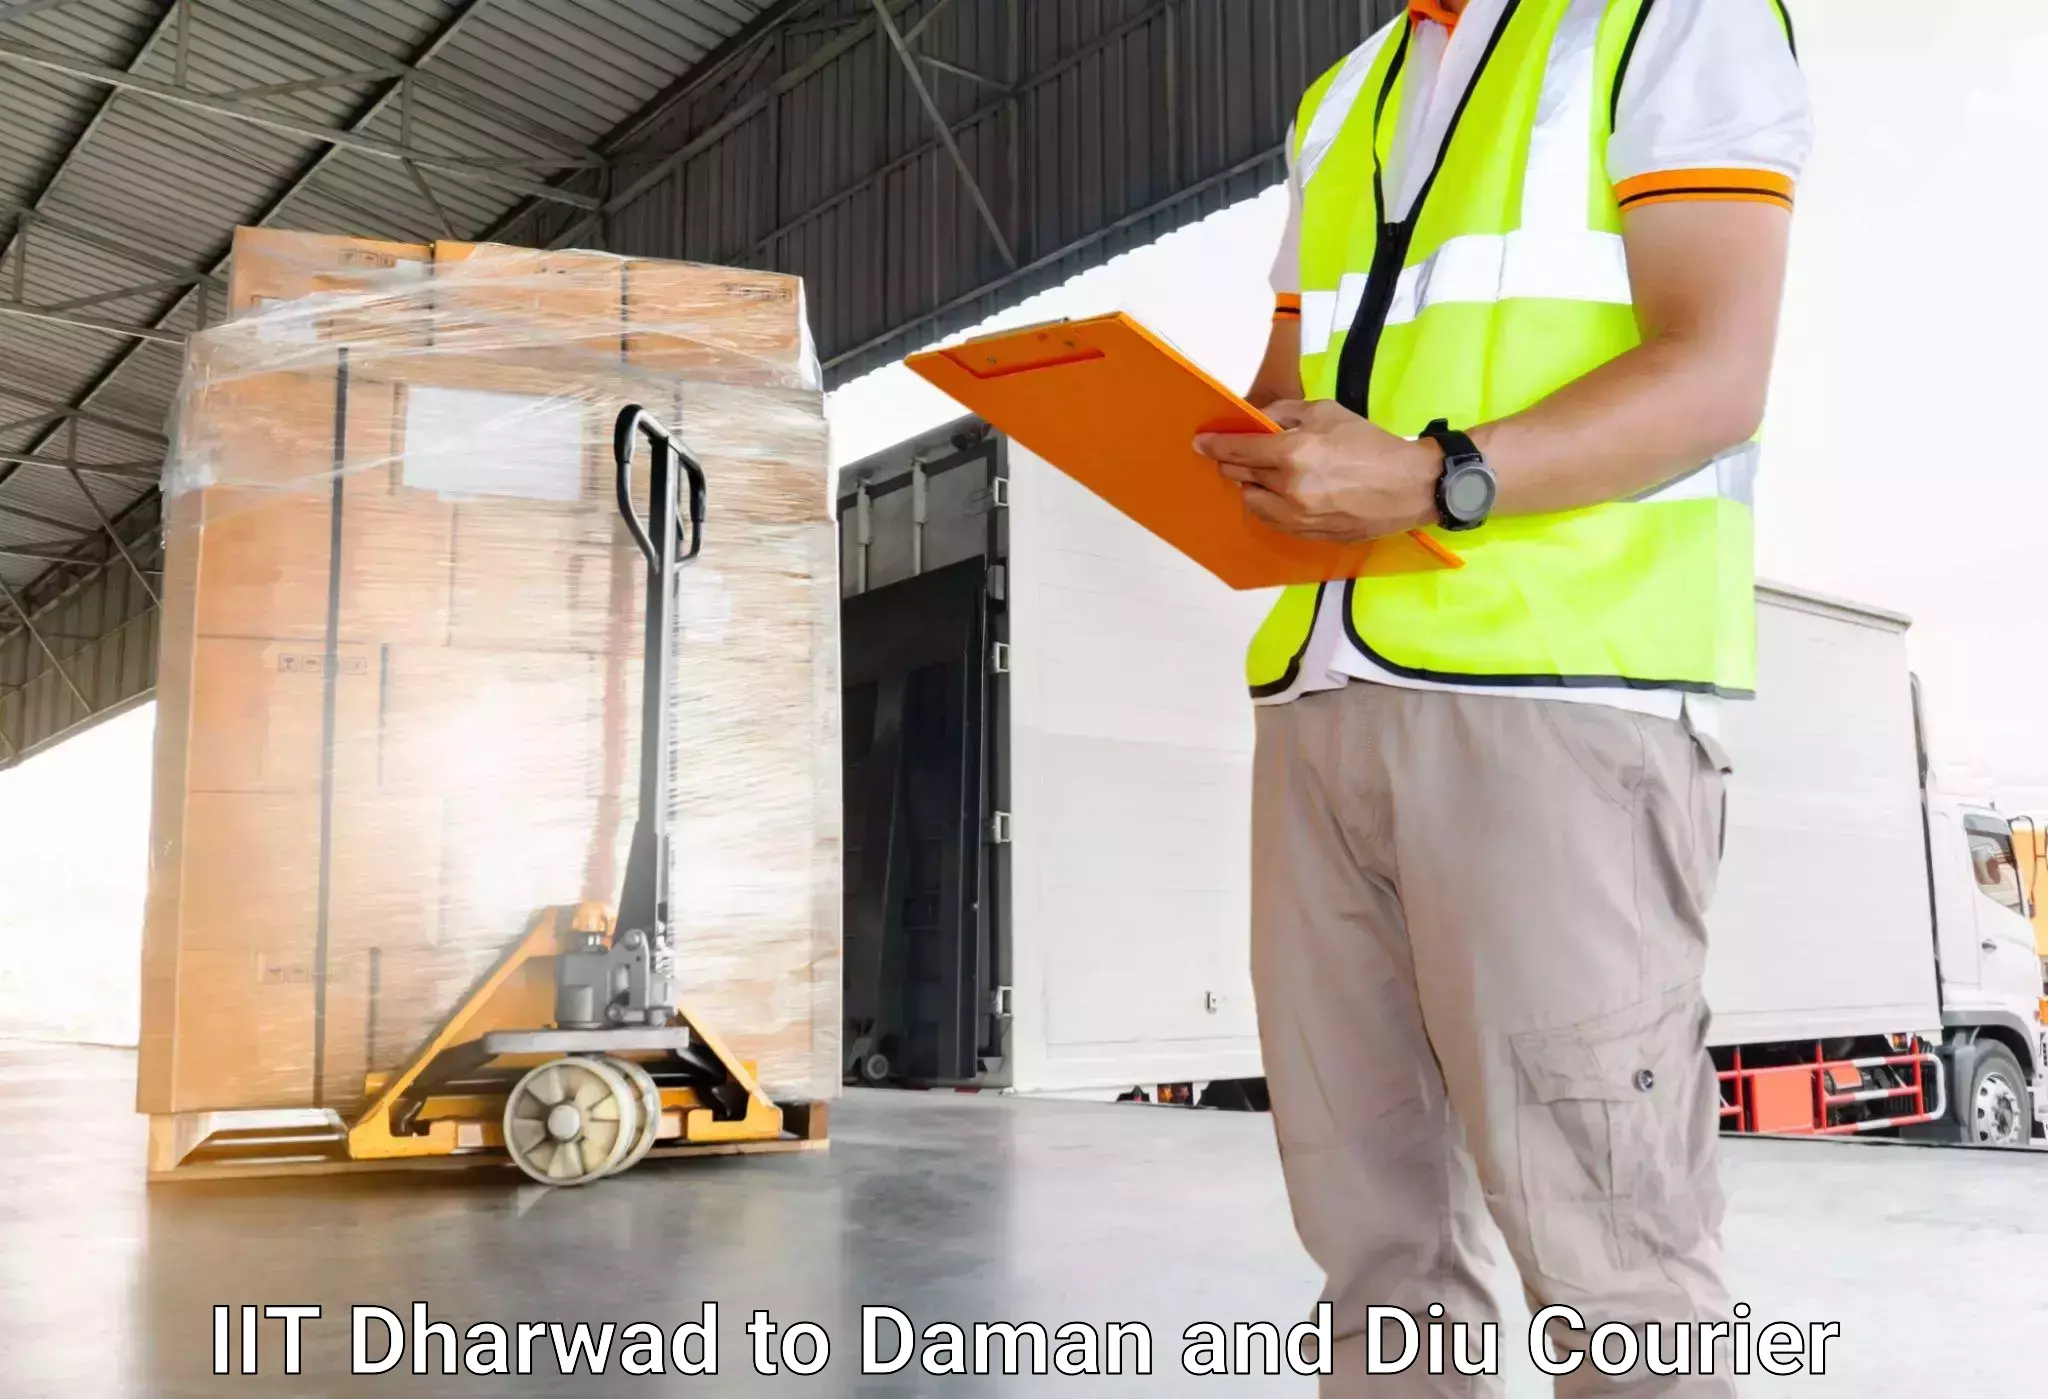 Luggage delivery network IIT Dharwad to Diu